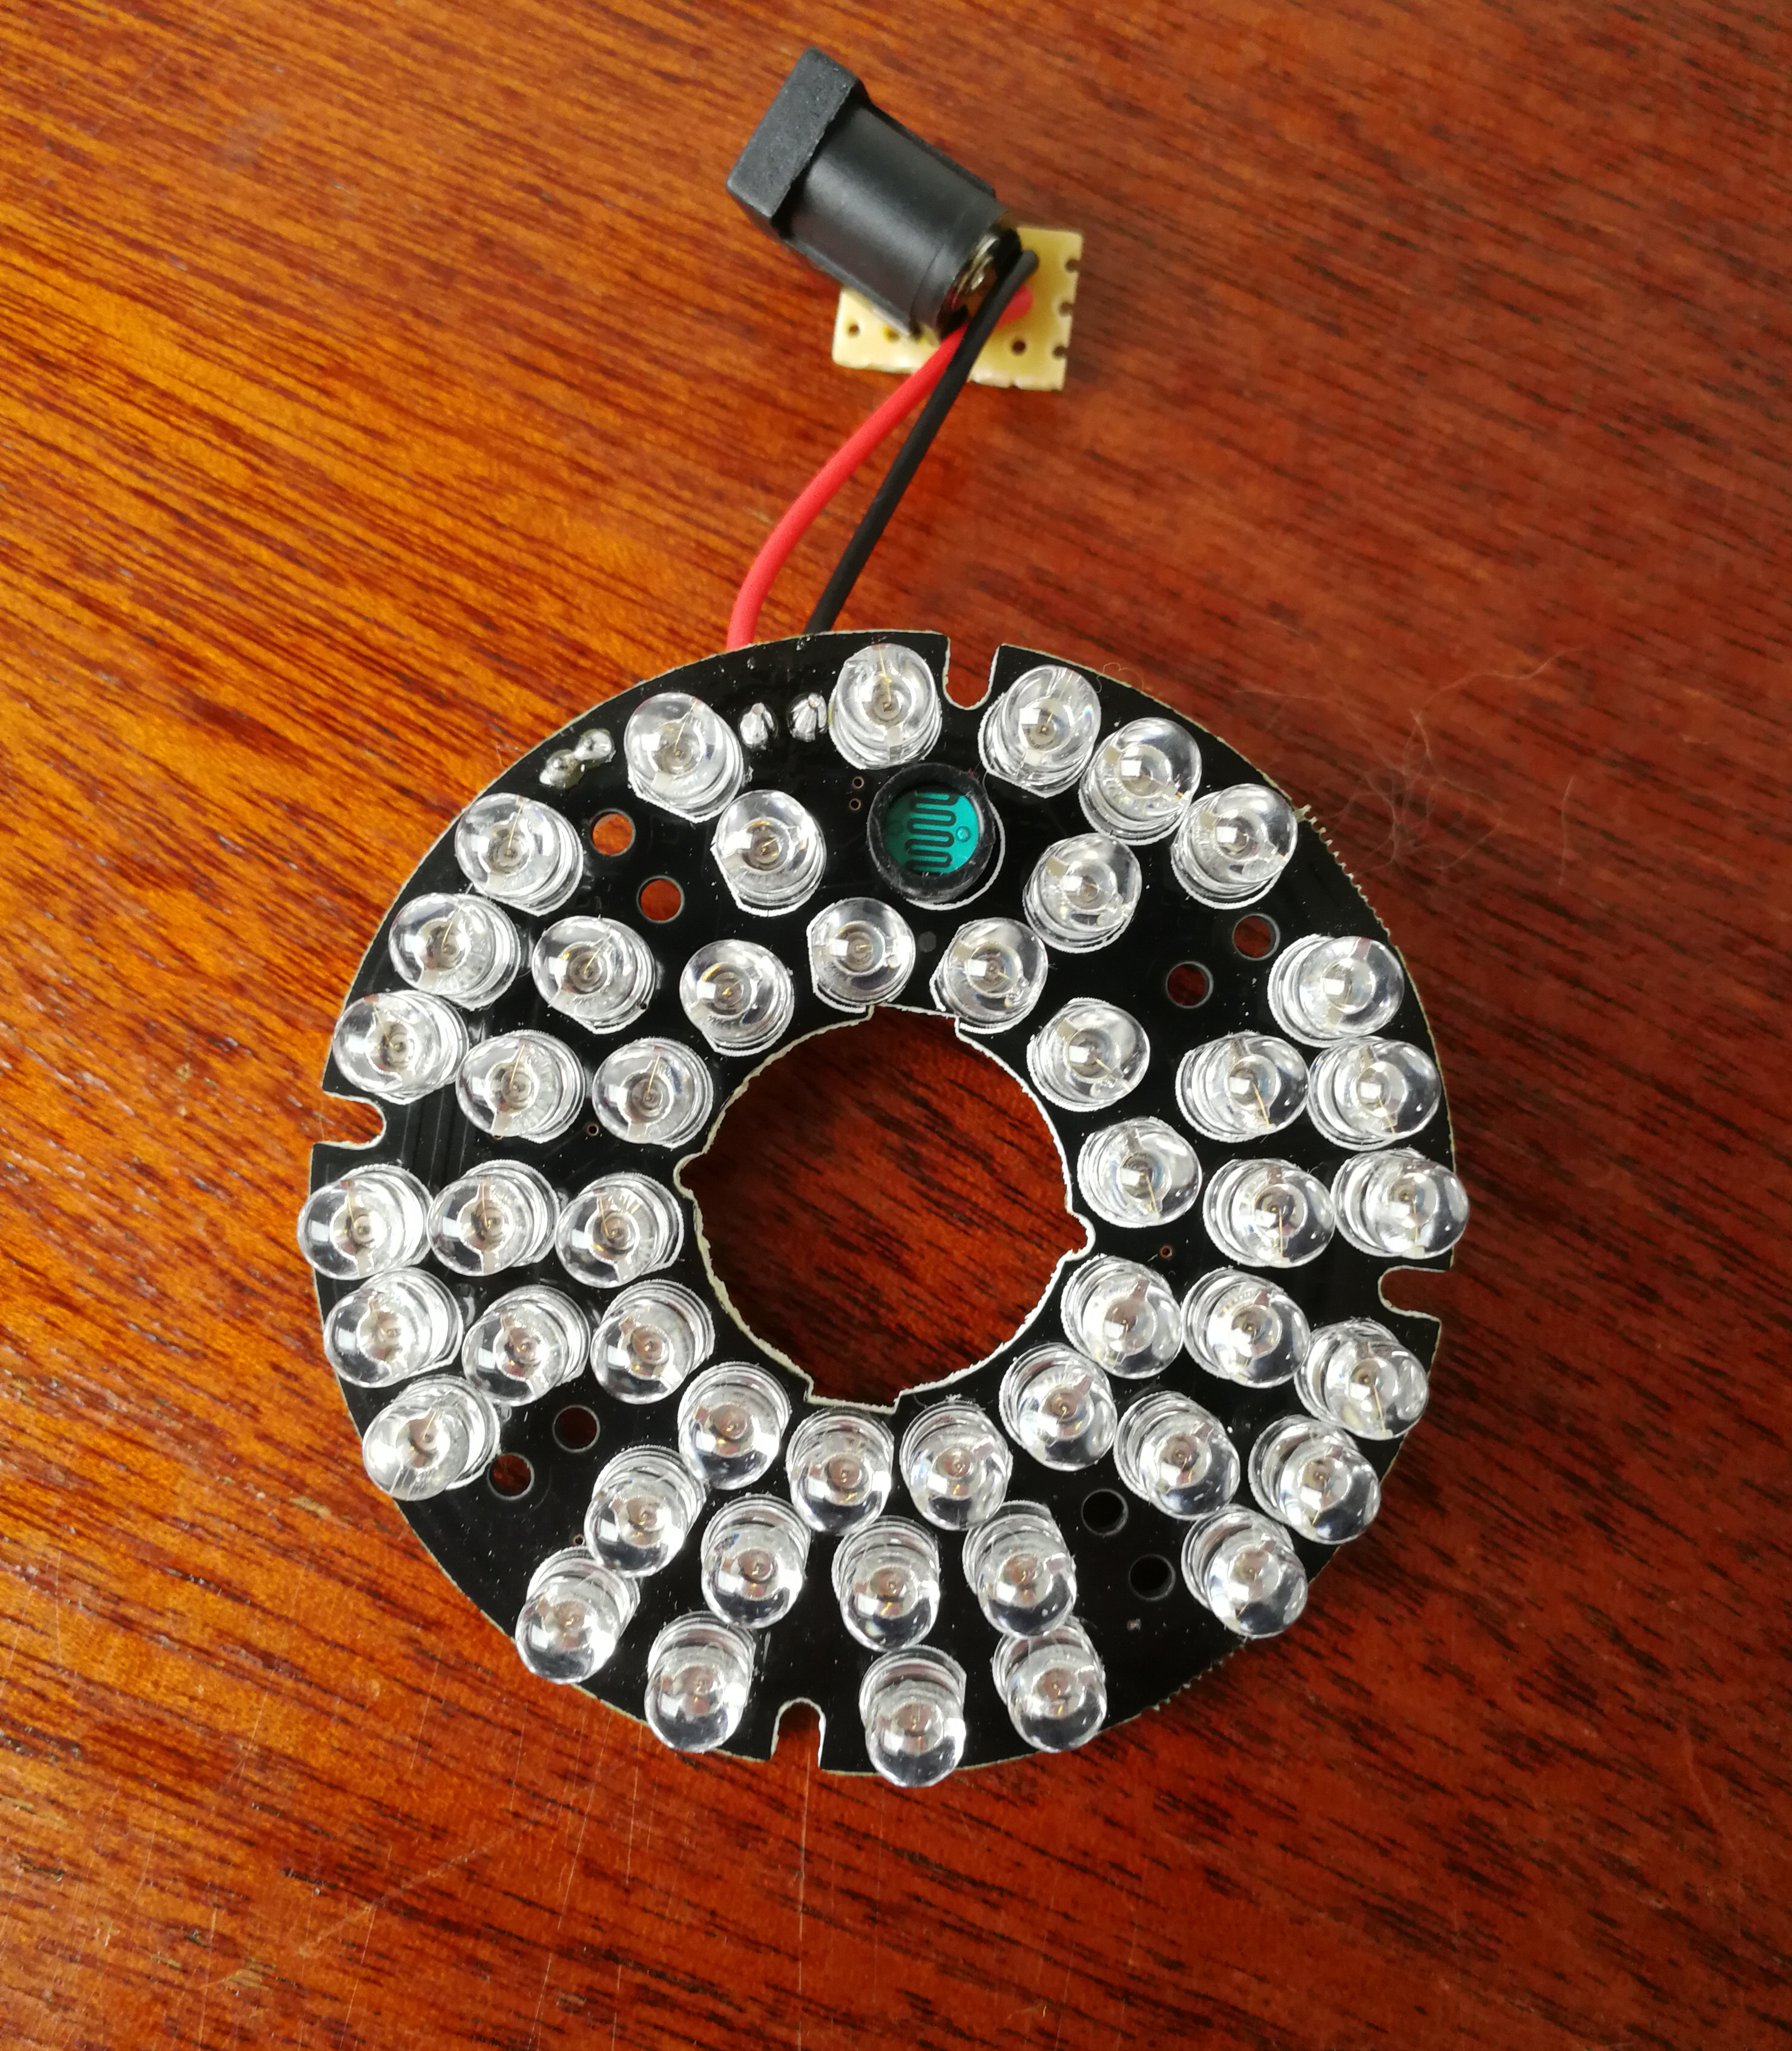 Picture of and IR Led ring with a cutout in the middle for the Pi camera.